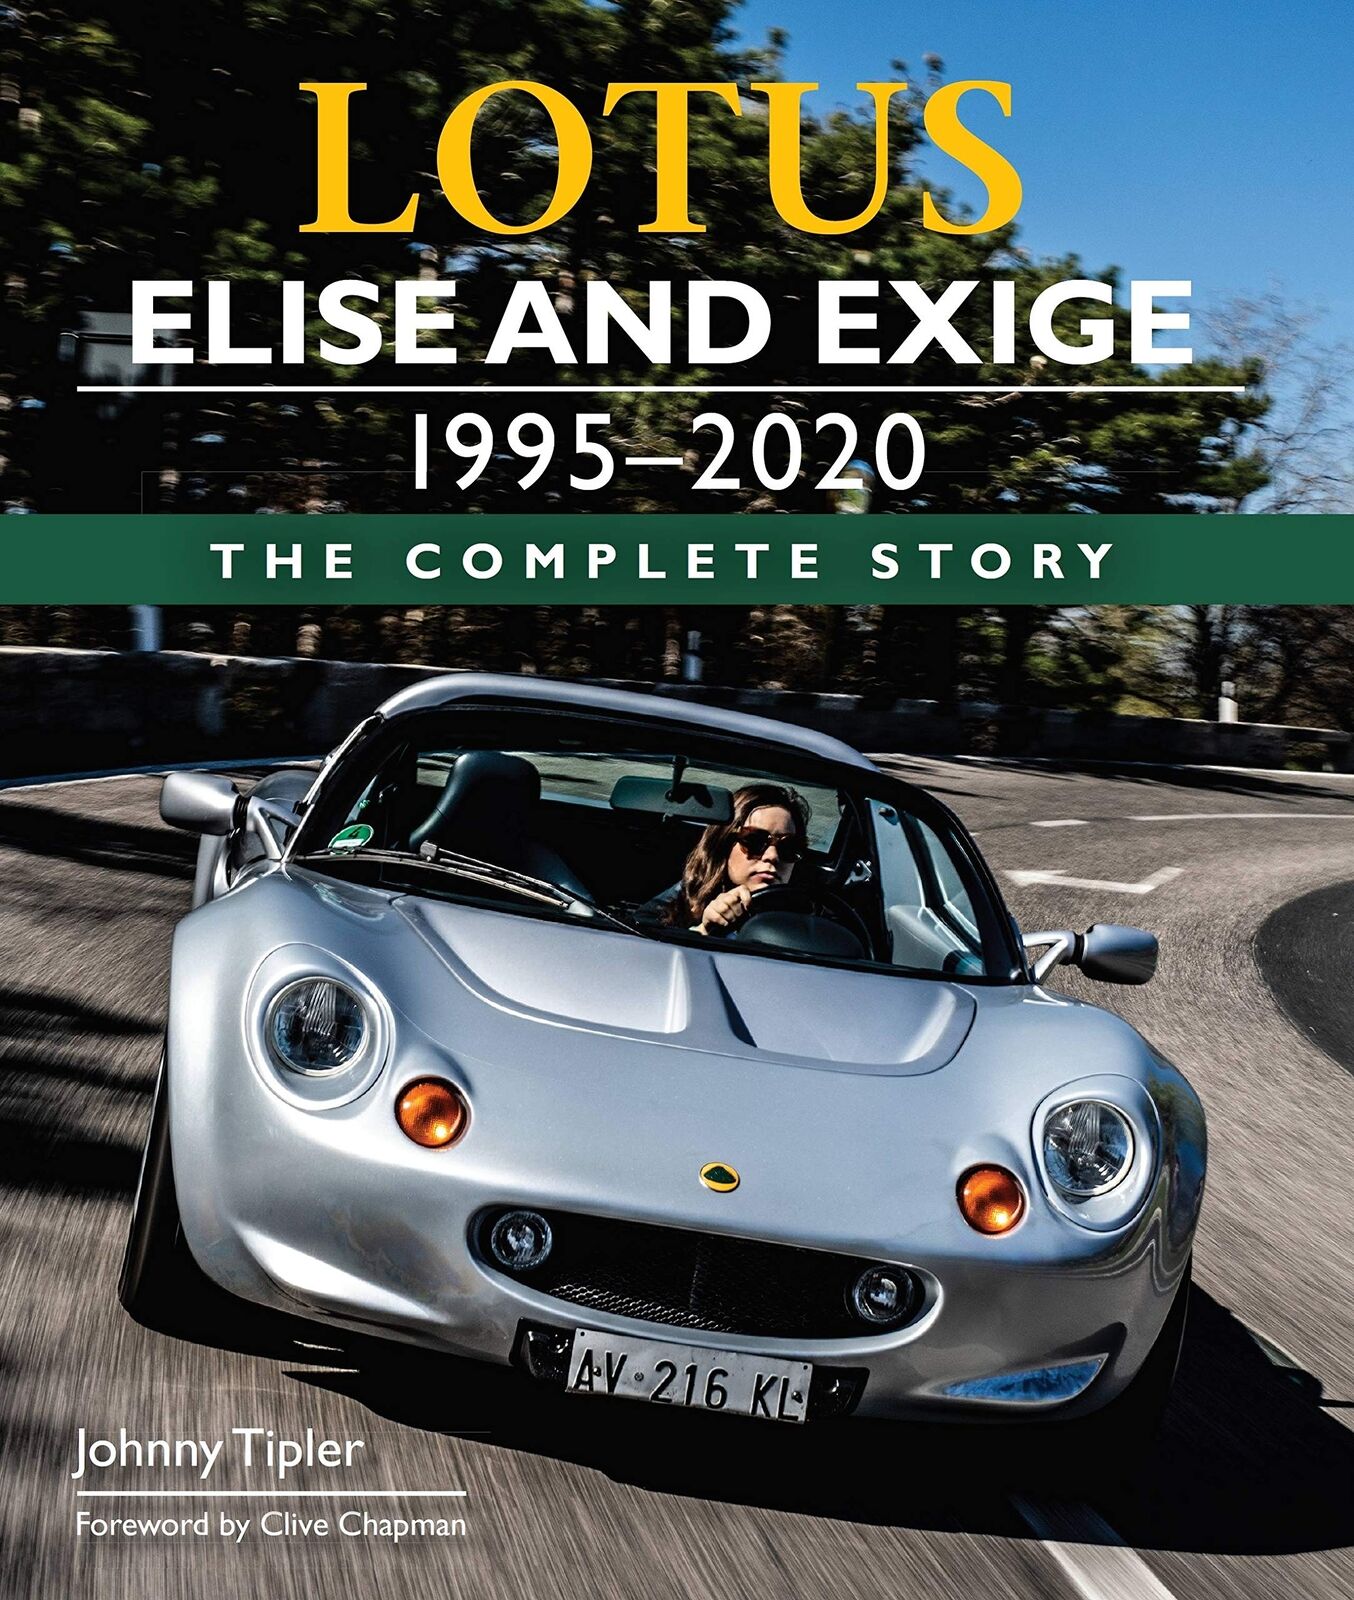 Lotus Elise and Exige 1995-2020 The Complete Story book